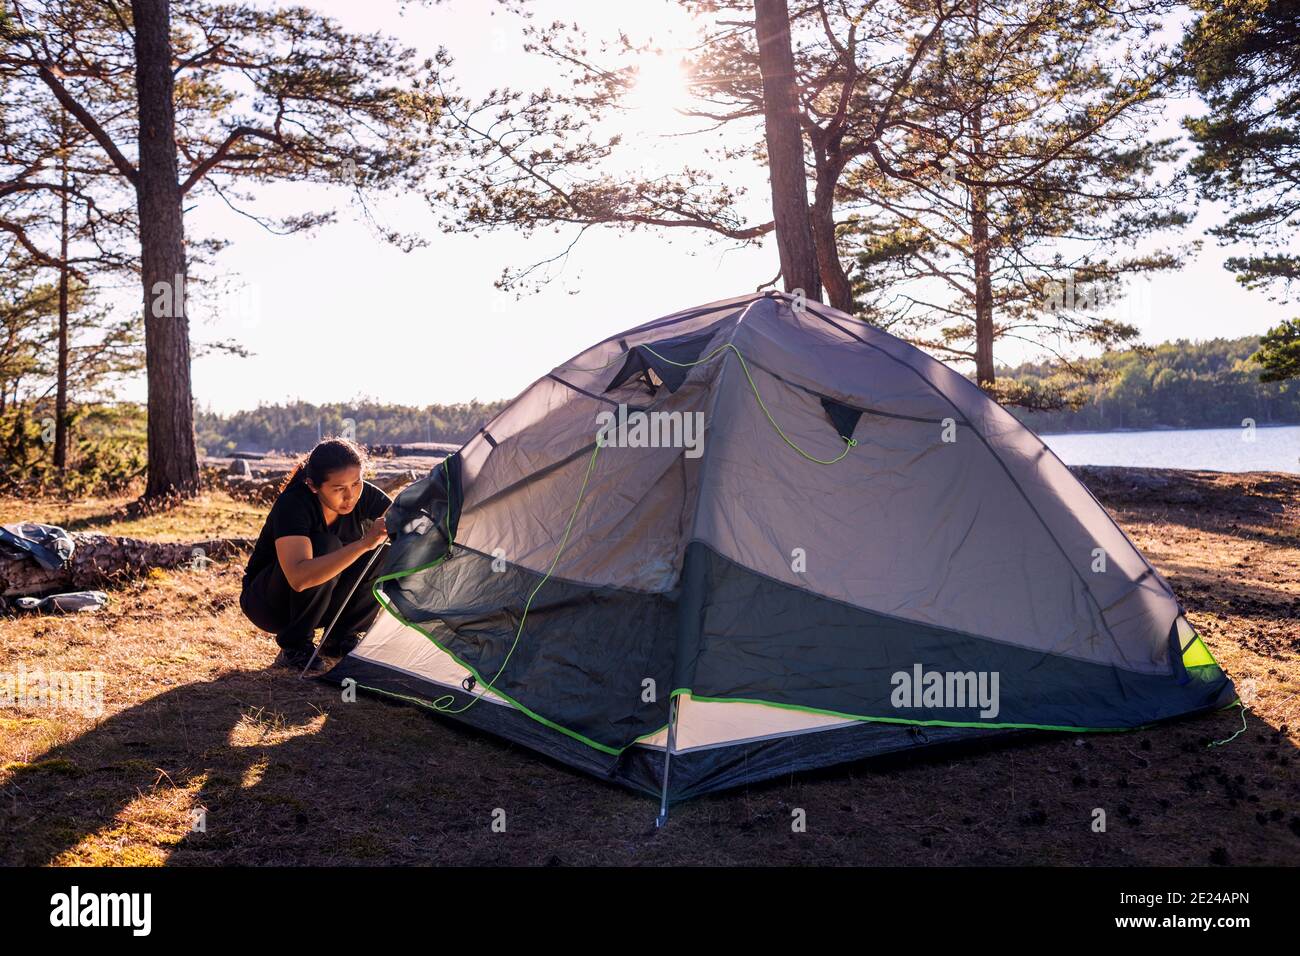 Woman checking tent Stock Photo